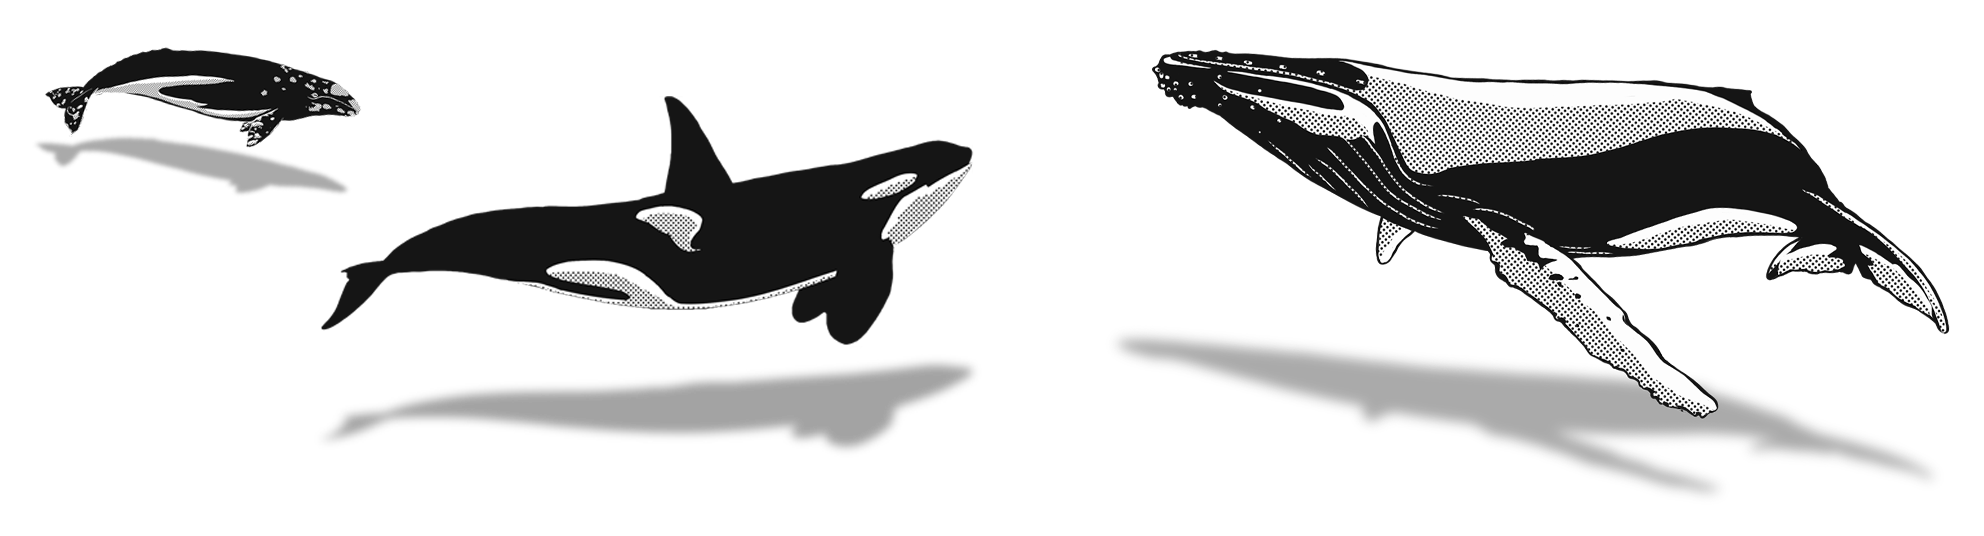 Orca clipart whale swimming. The whaleplanner a watching